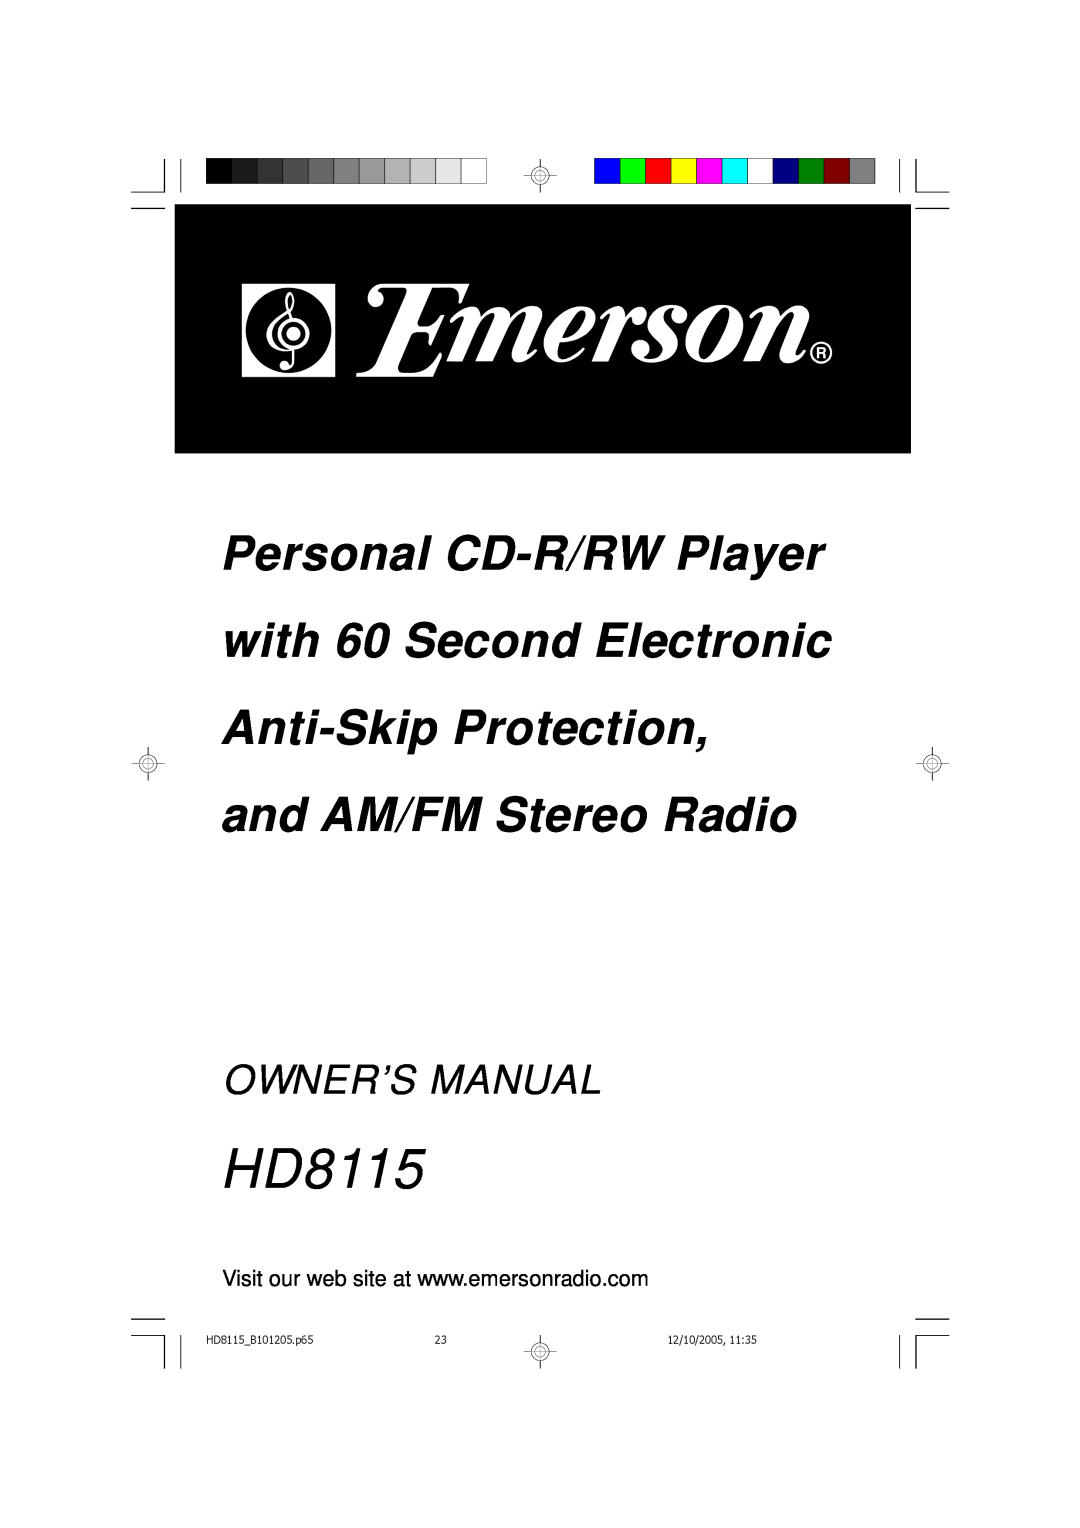 Emerson HD8115 owner manual Personal CD-R/RWPlayer with 60 Second Electronic, Anti-SkipProtection and AM/FM Stereo Radio 